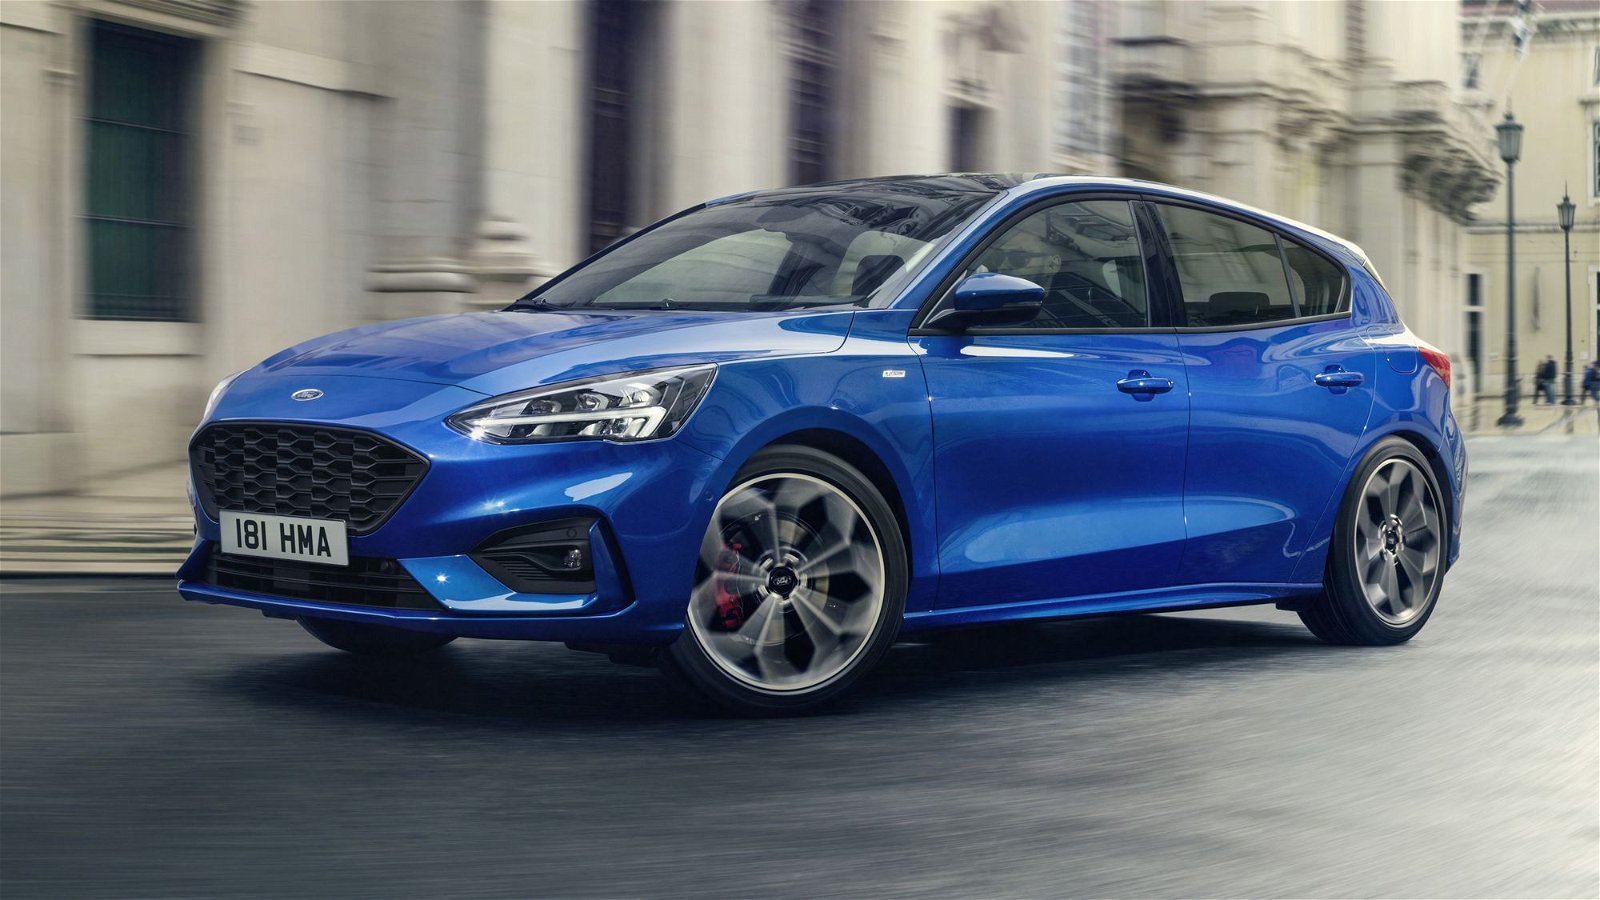 2019 Ford Focus front view